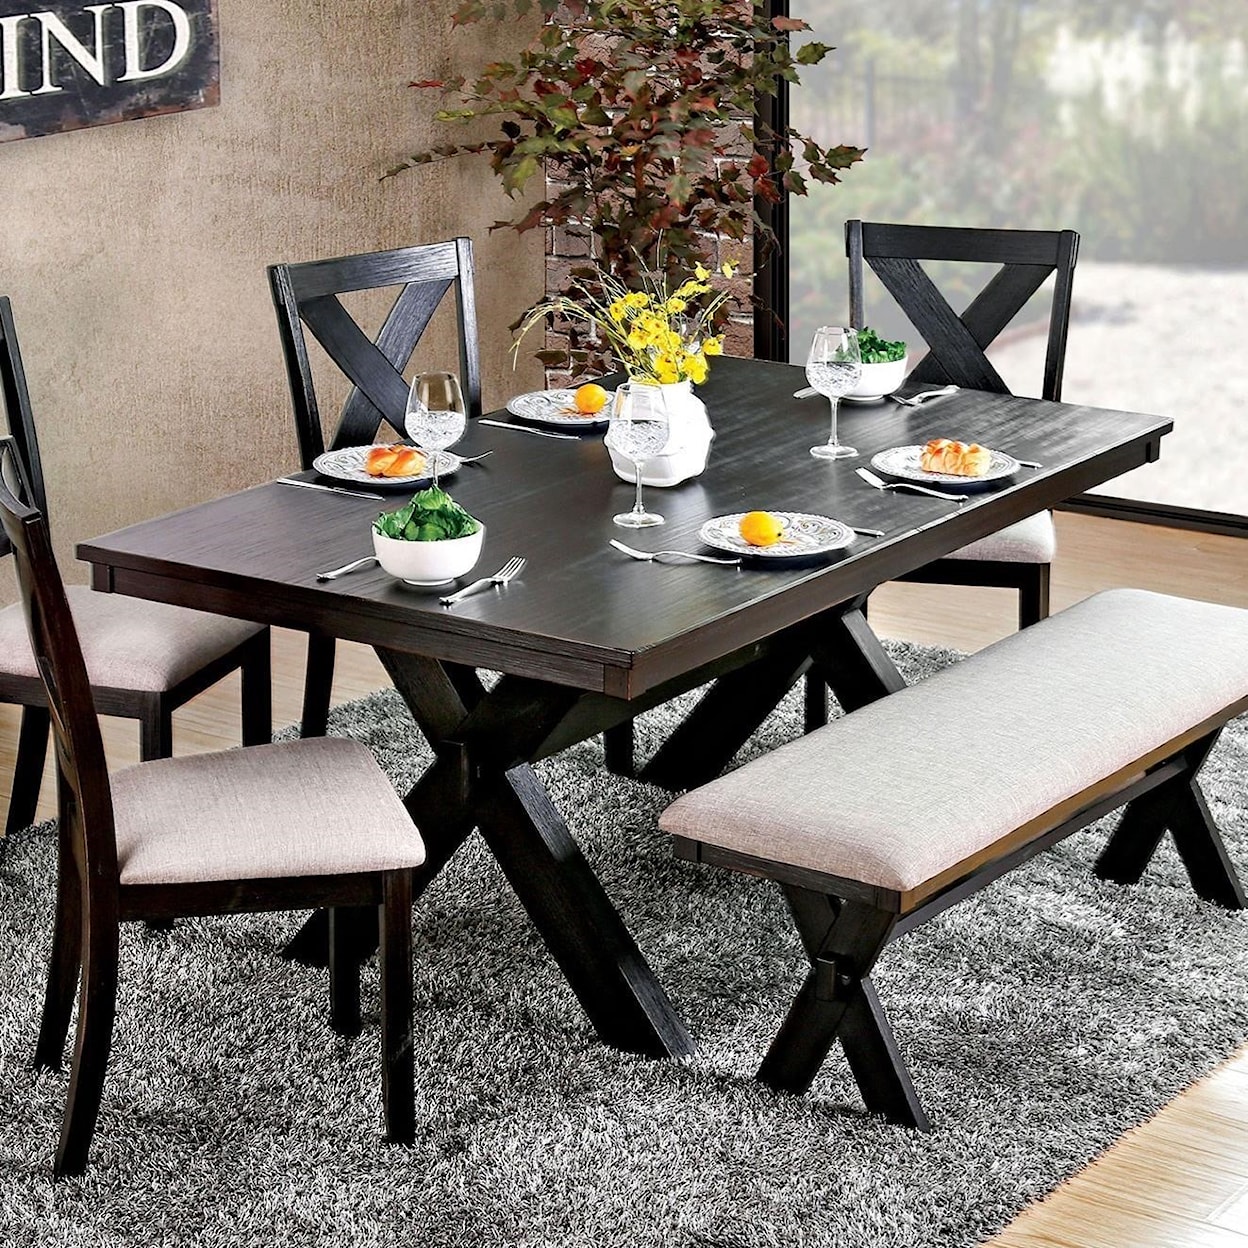 FUSA Xanthe Dining Table